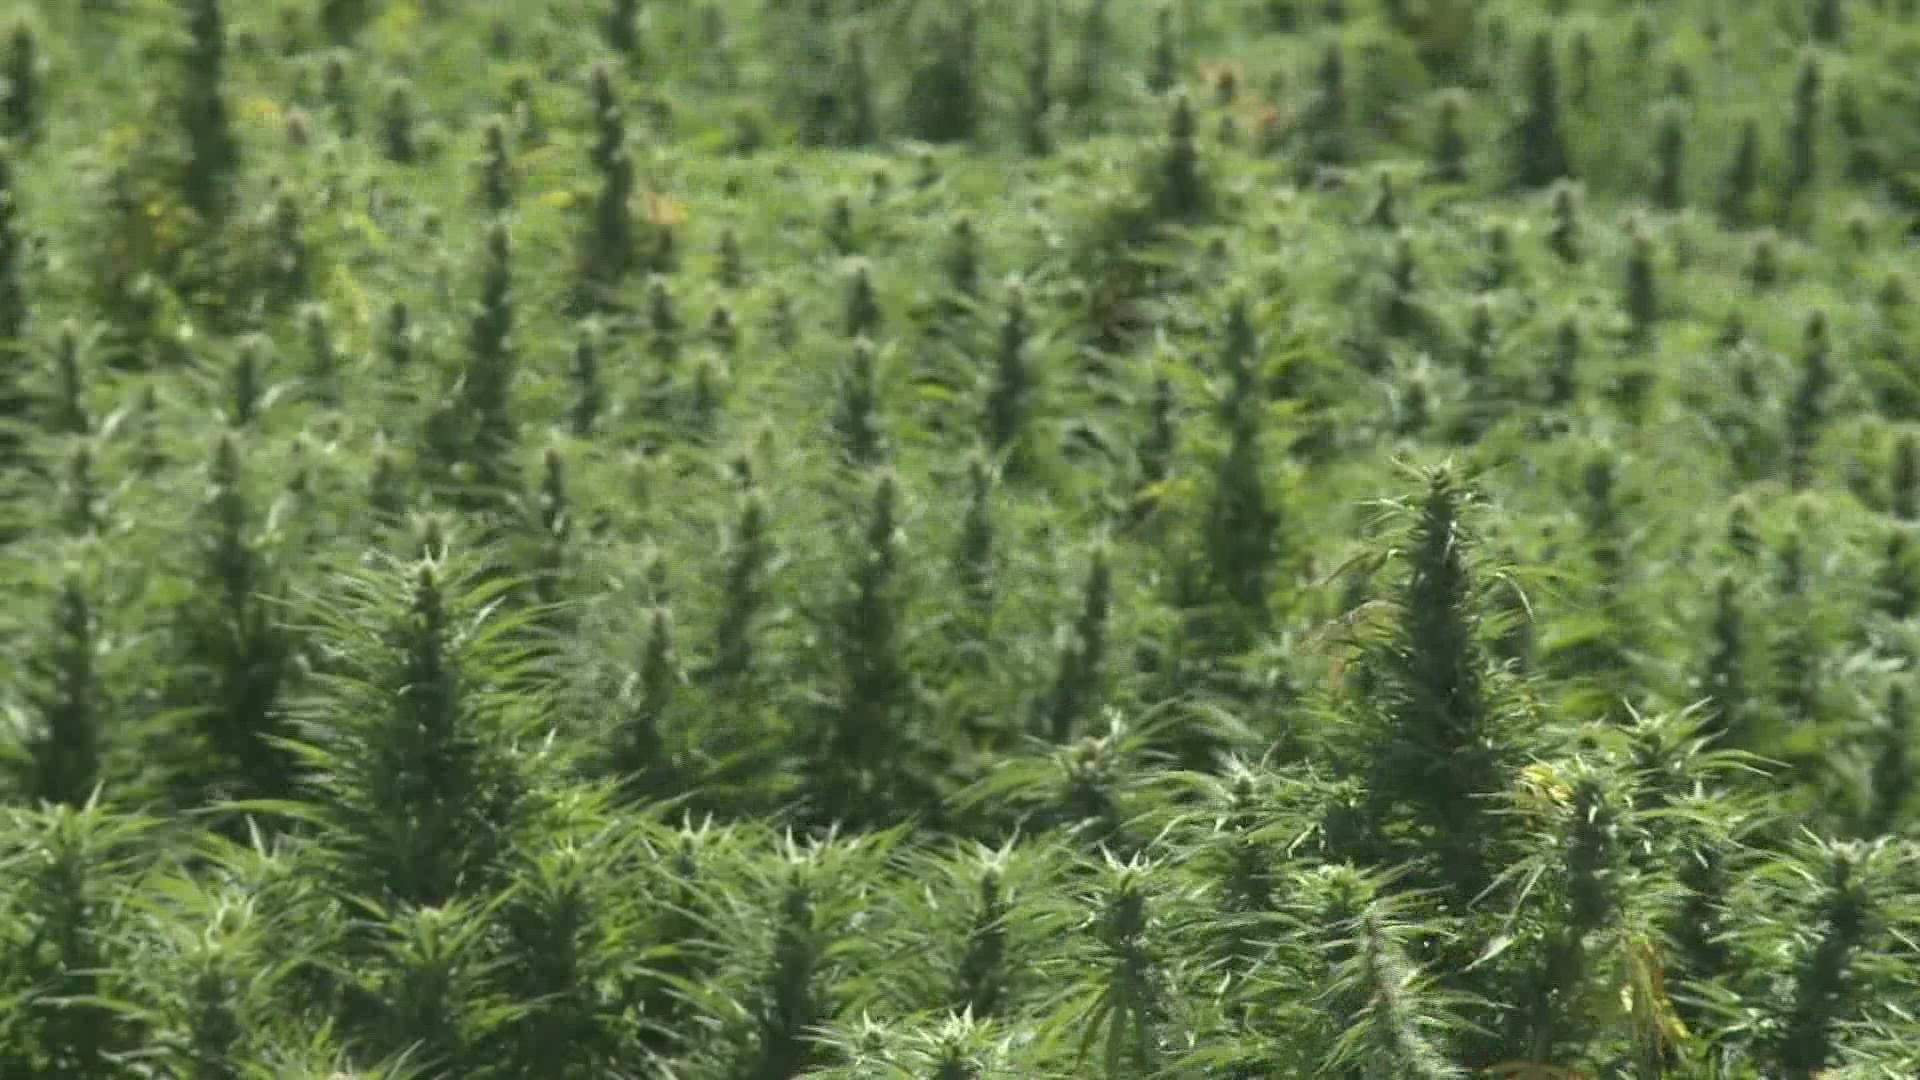 Rep. Pingree’s Hemp Advancement Act aims to remove three major restrictions that are hindering the hemp industry across the state.